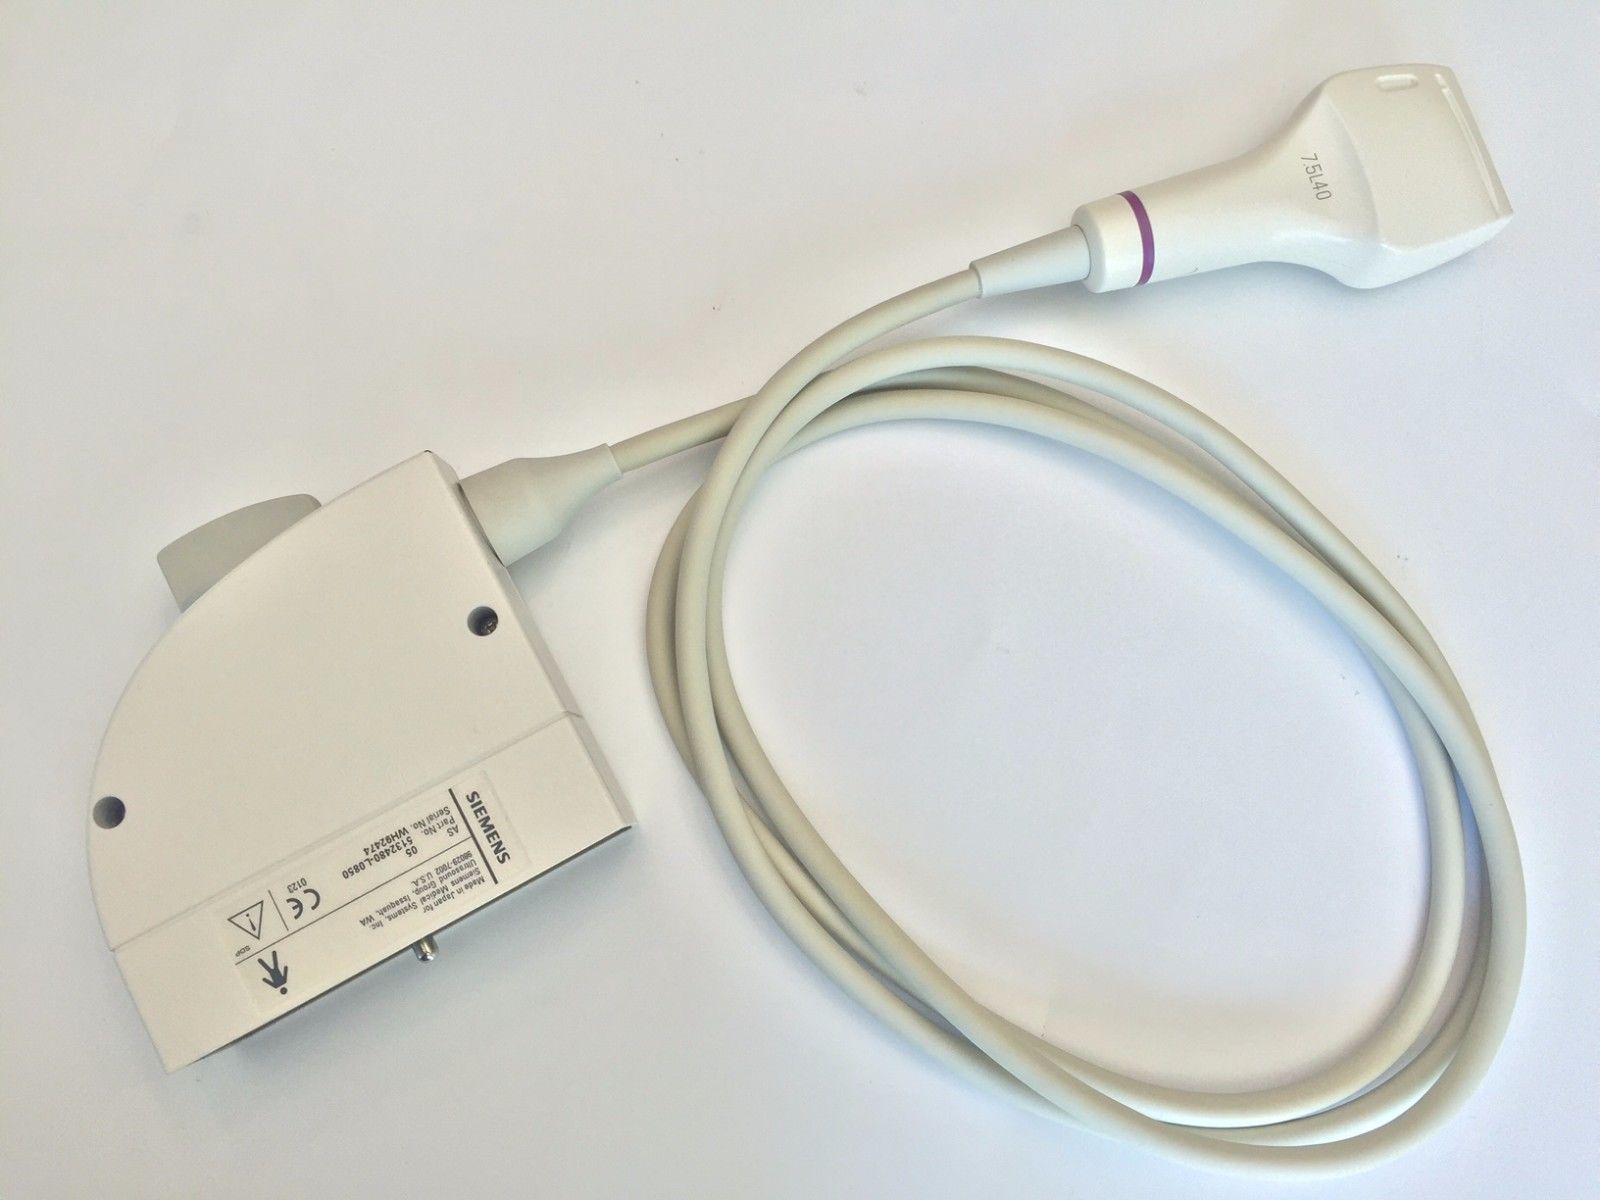 SIEMENS 7.5L40+ COMPACT LINEAR ARRAY TRANSDUCER PROBE ~ USED Work Perfectly DIAGNOSTIC ULTRASOUND MACHINES FOR SALE